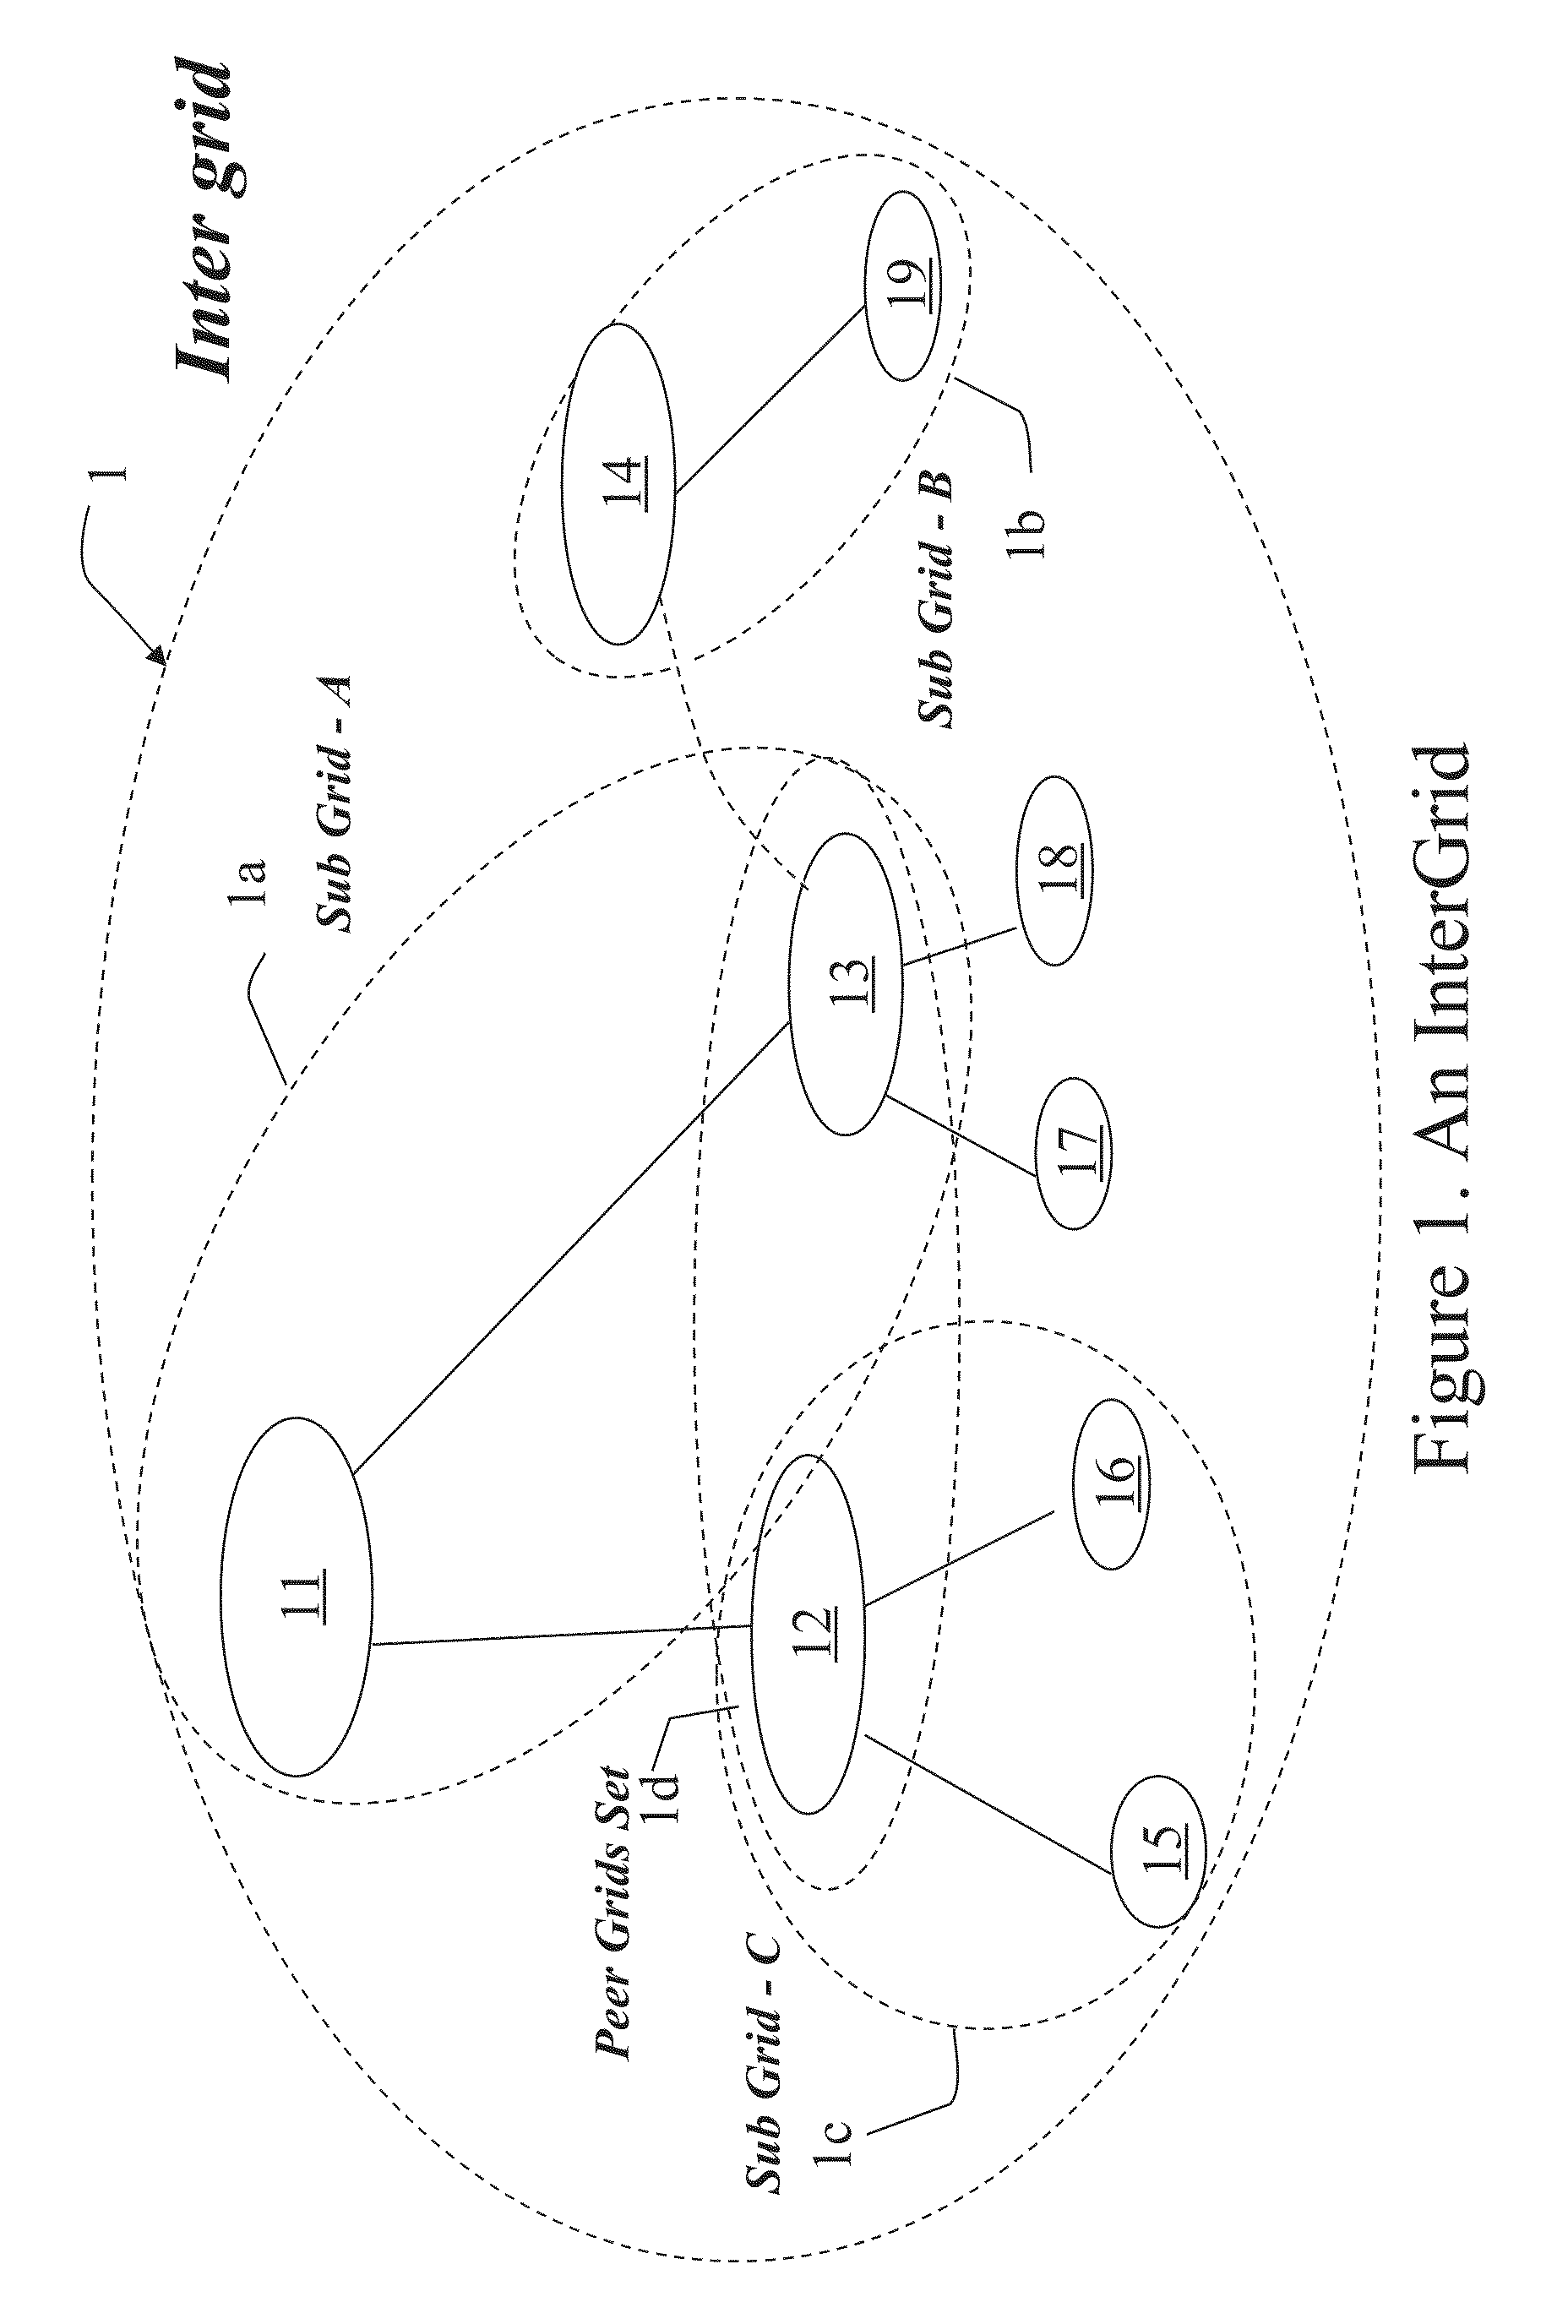 Information Processing Grid and Method for High Performance and Efficient Resource Utilization